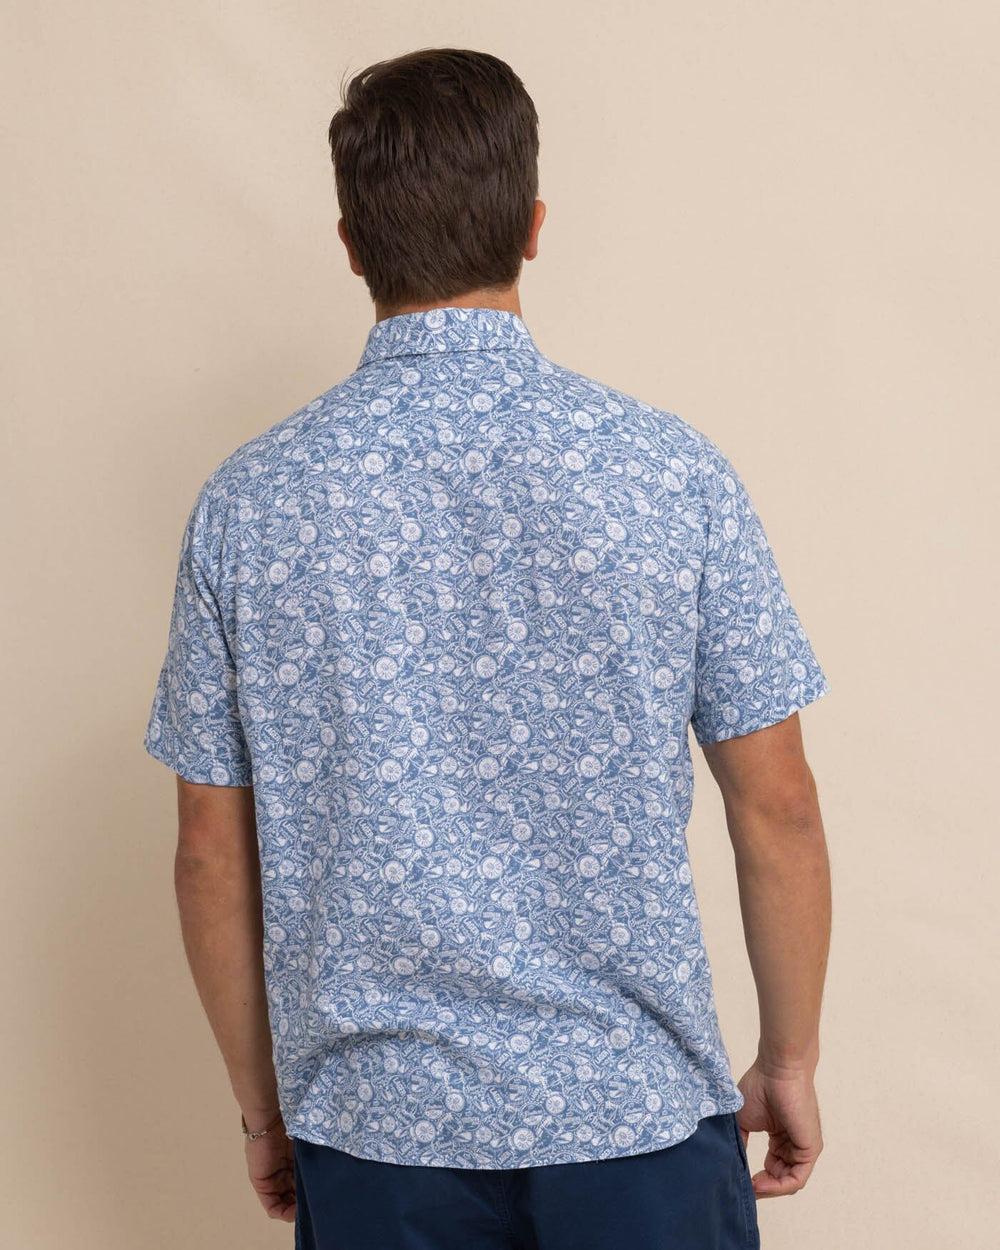 The back view of the Southern Tide Linen Rayon Caps Off Short Sleeve Sport Shirt by Southern Tide - Coronet Blue